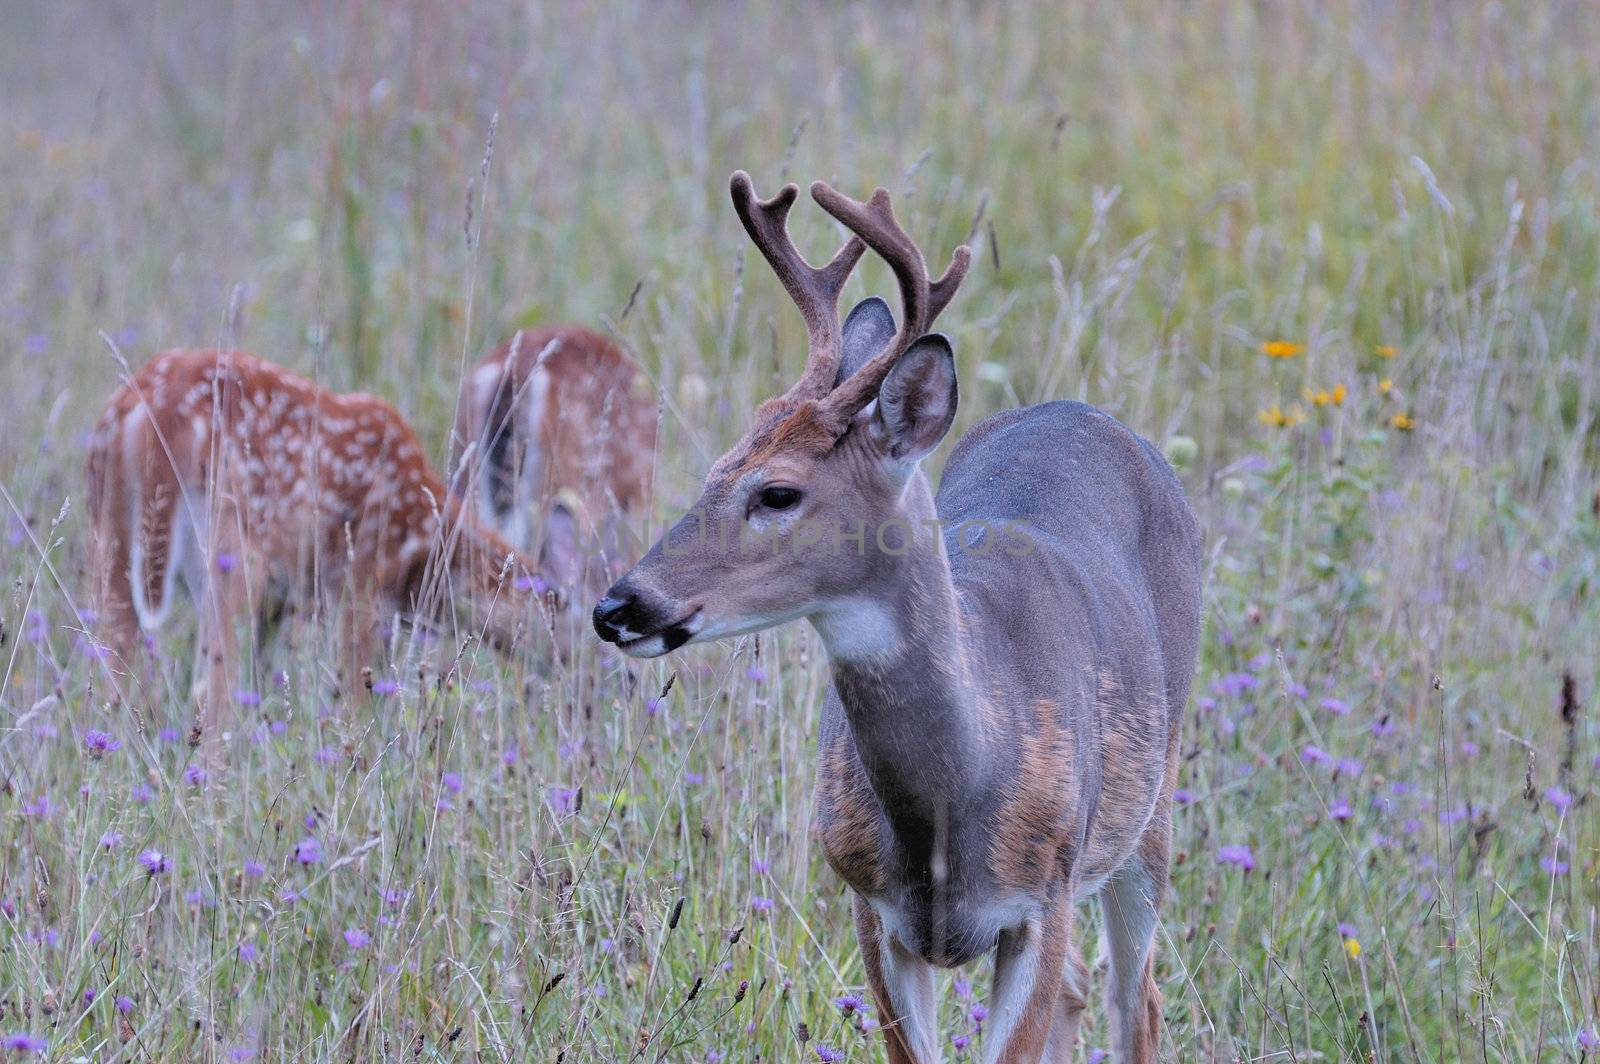 A whitetail deer buck in summer velvet standing in a field with fawns.